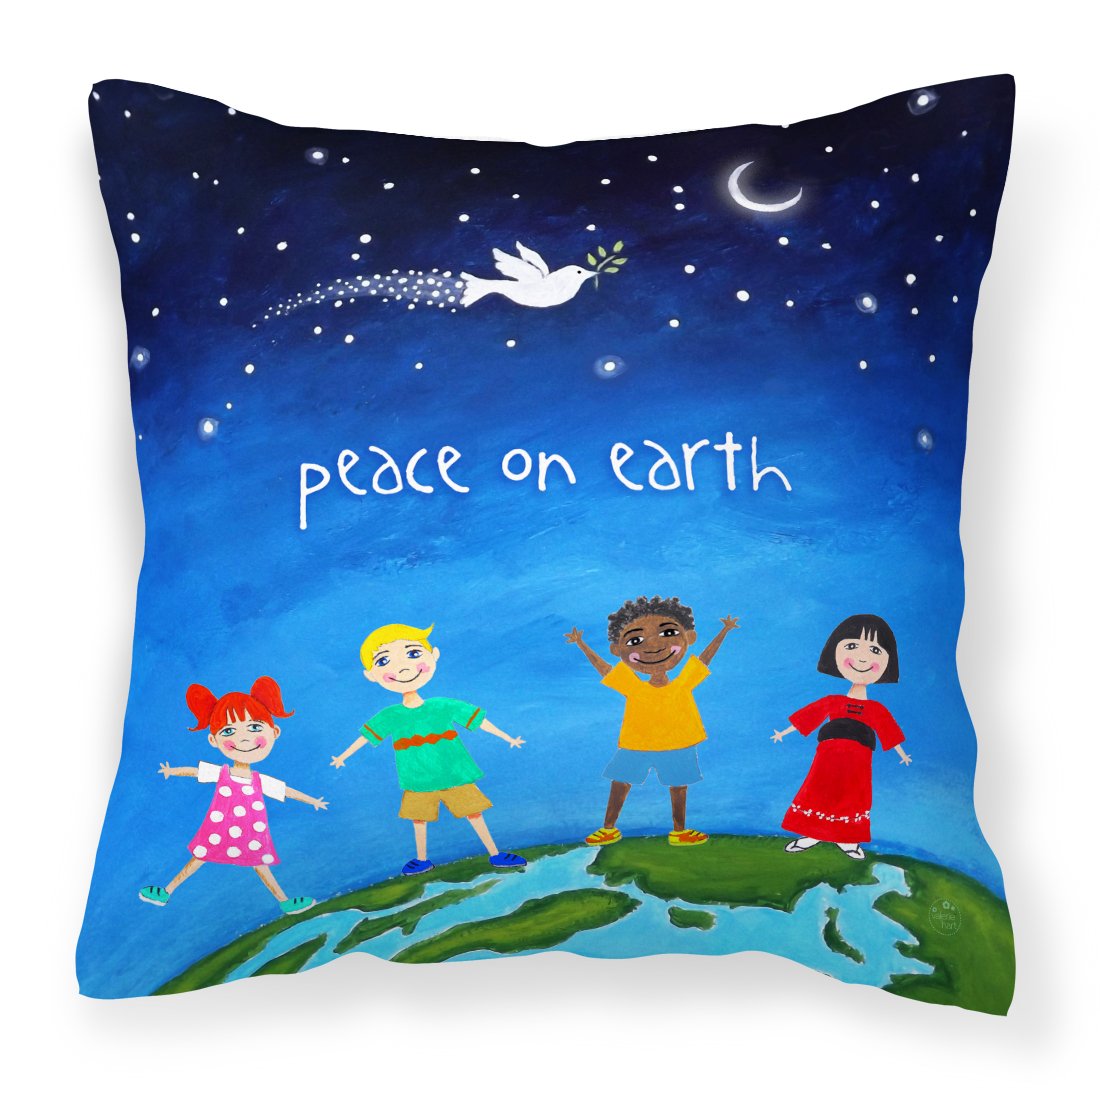 Peace on Earth Fabric Decorative Pillow VHA3039PW1818 by Caroline's Treasures